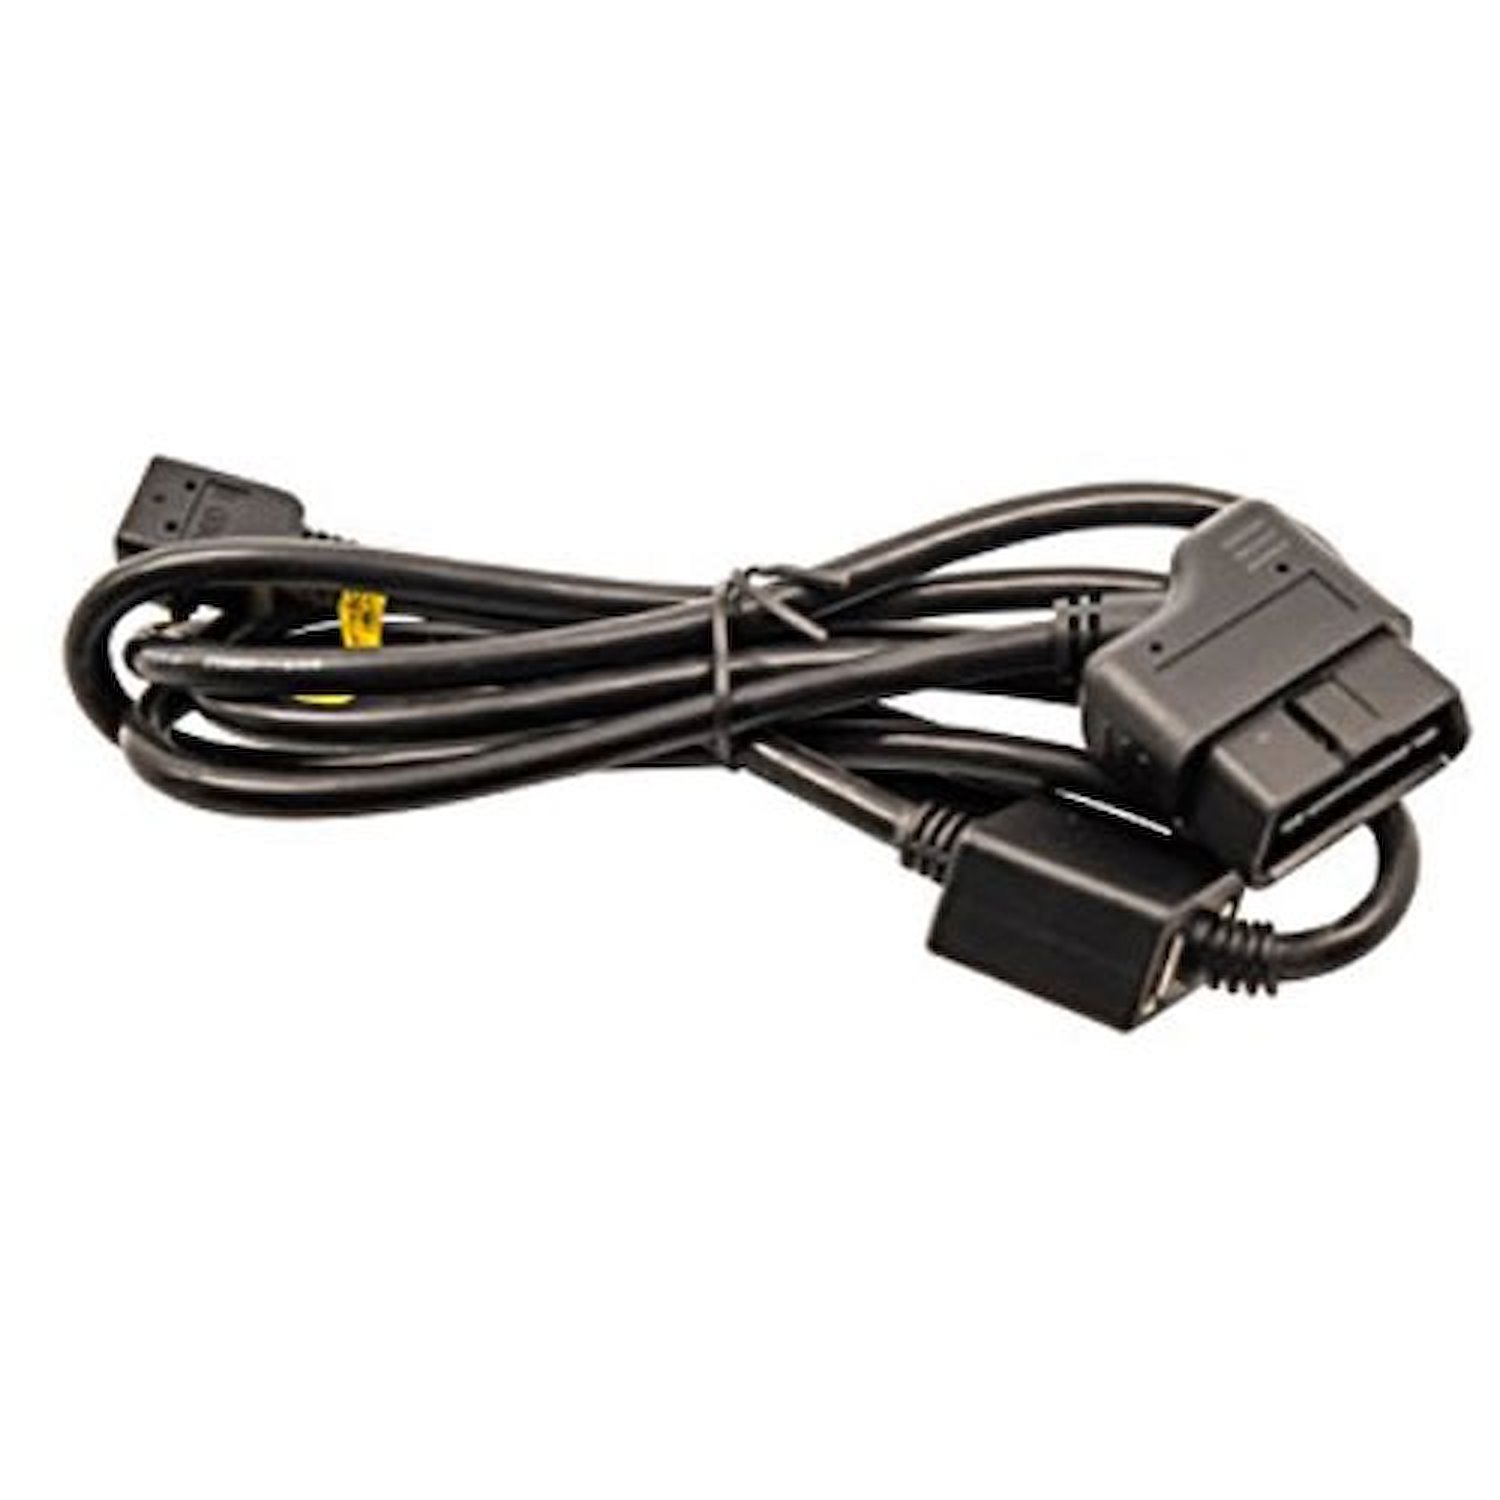 Livewire TS+ Replacement OBDII Cable For SCT Performance Livewire TS+ Programmers